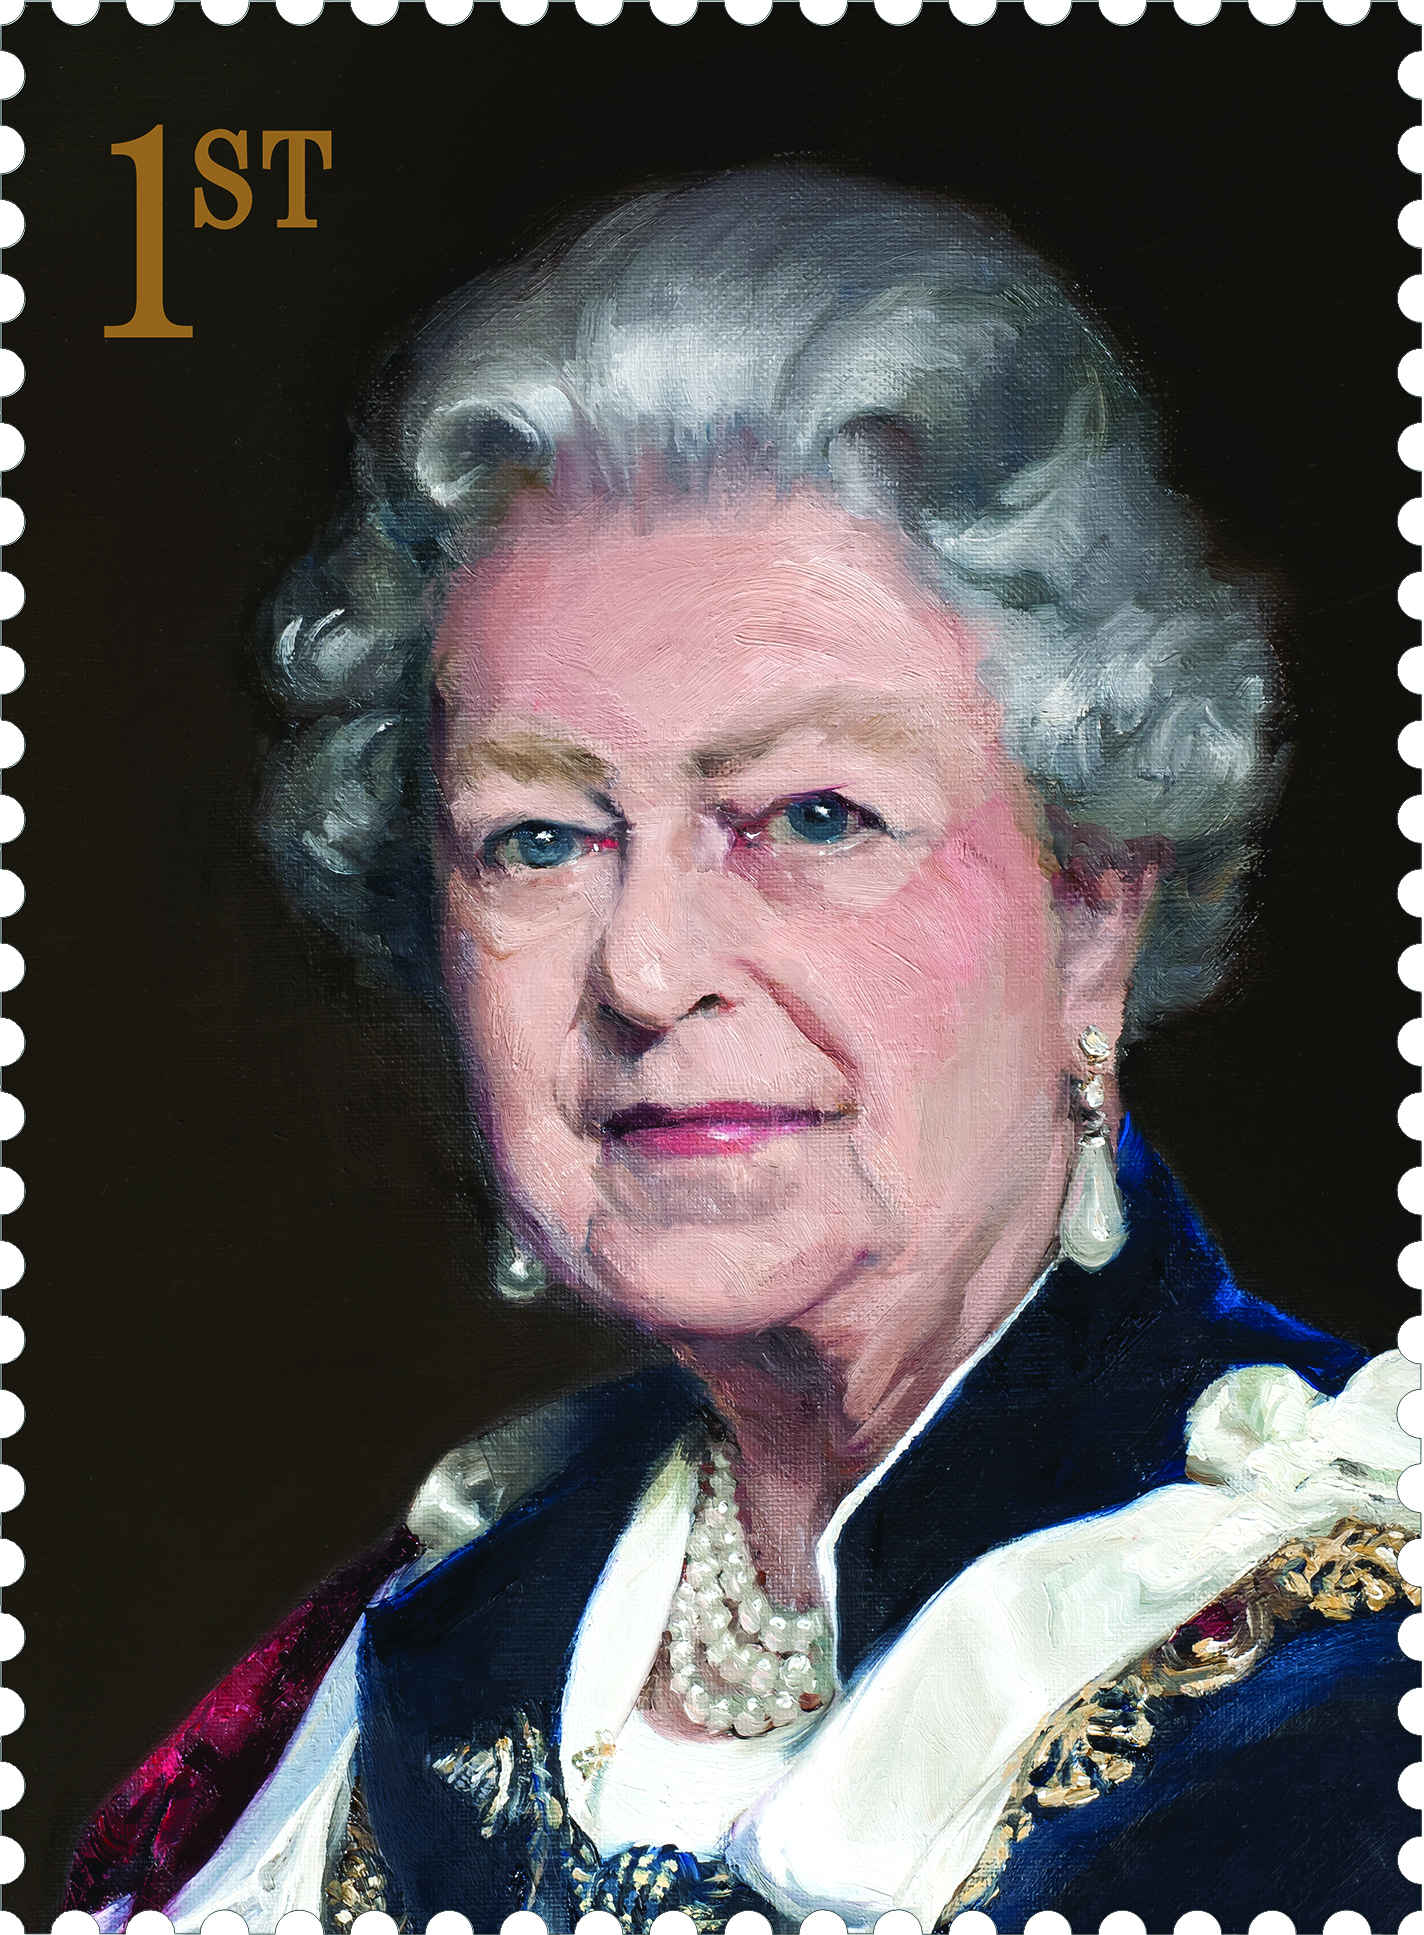 1st class coro - Which is your favourite portrait of the Queen?